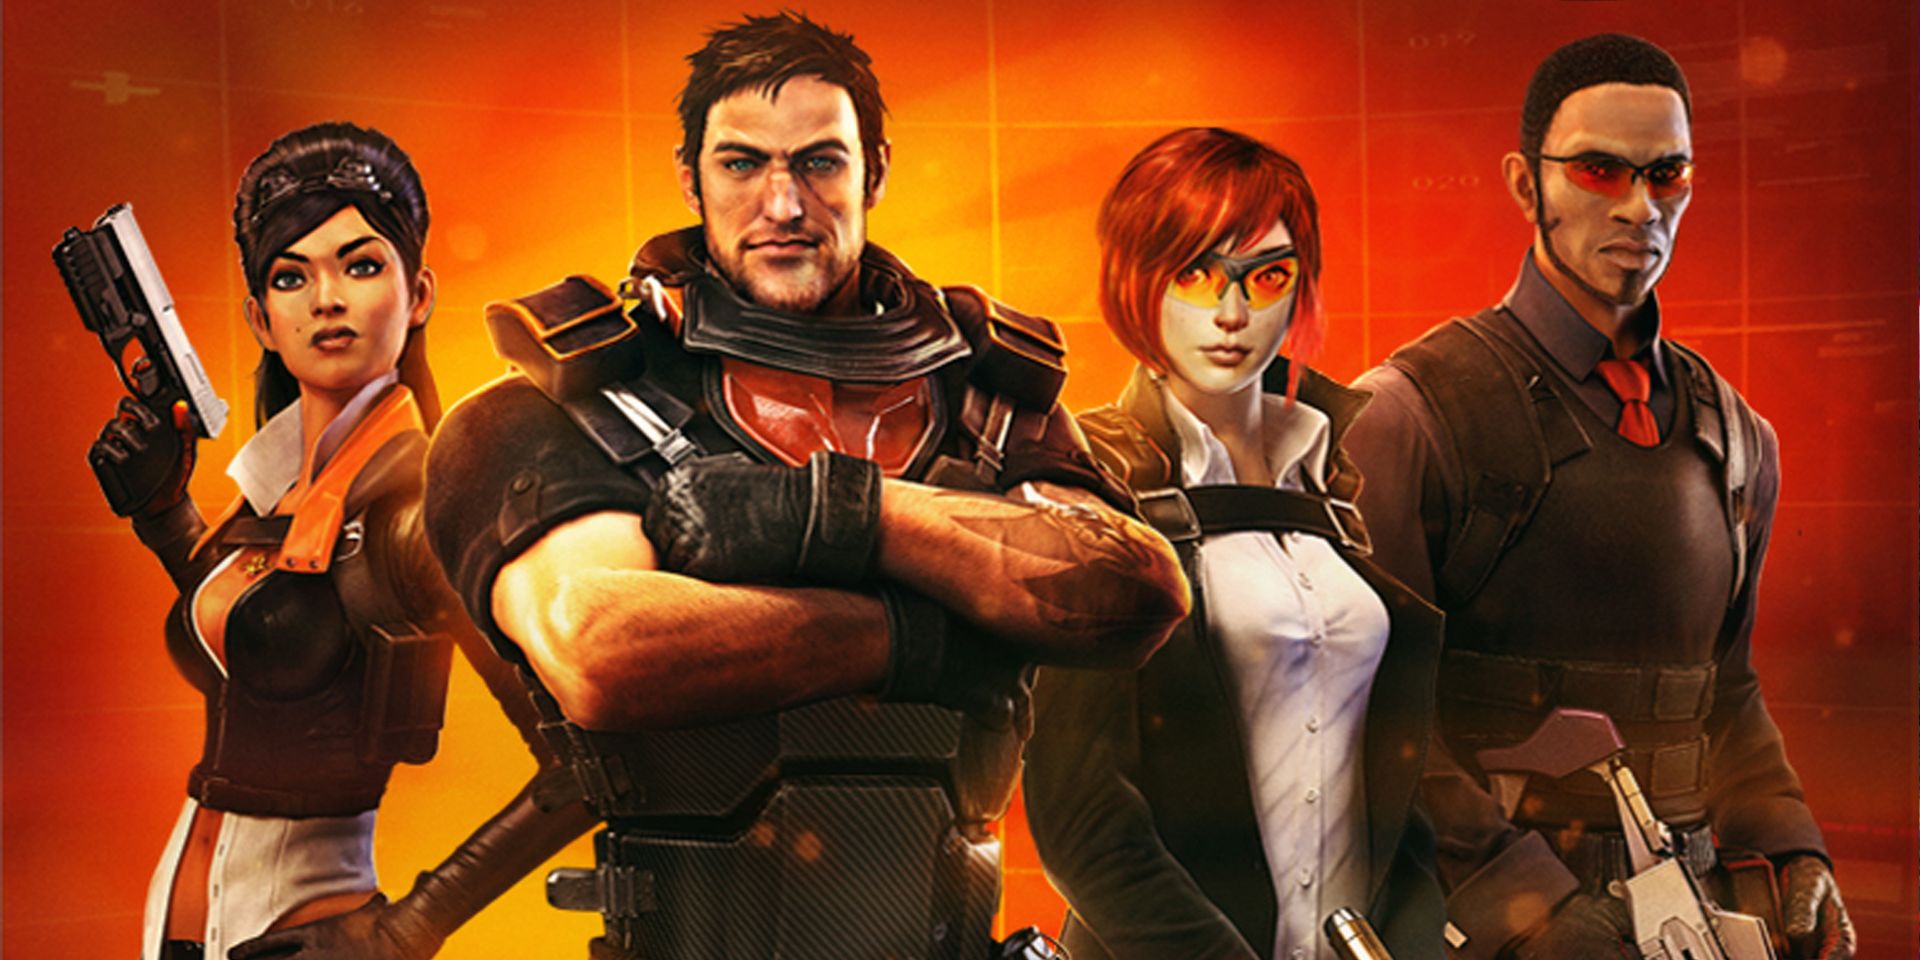 The four characters who later later be re-worked for the game Fuse.